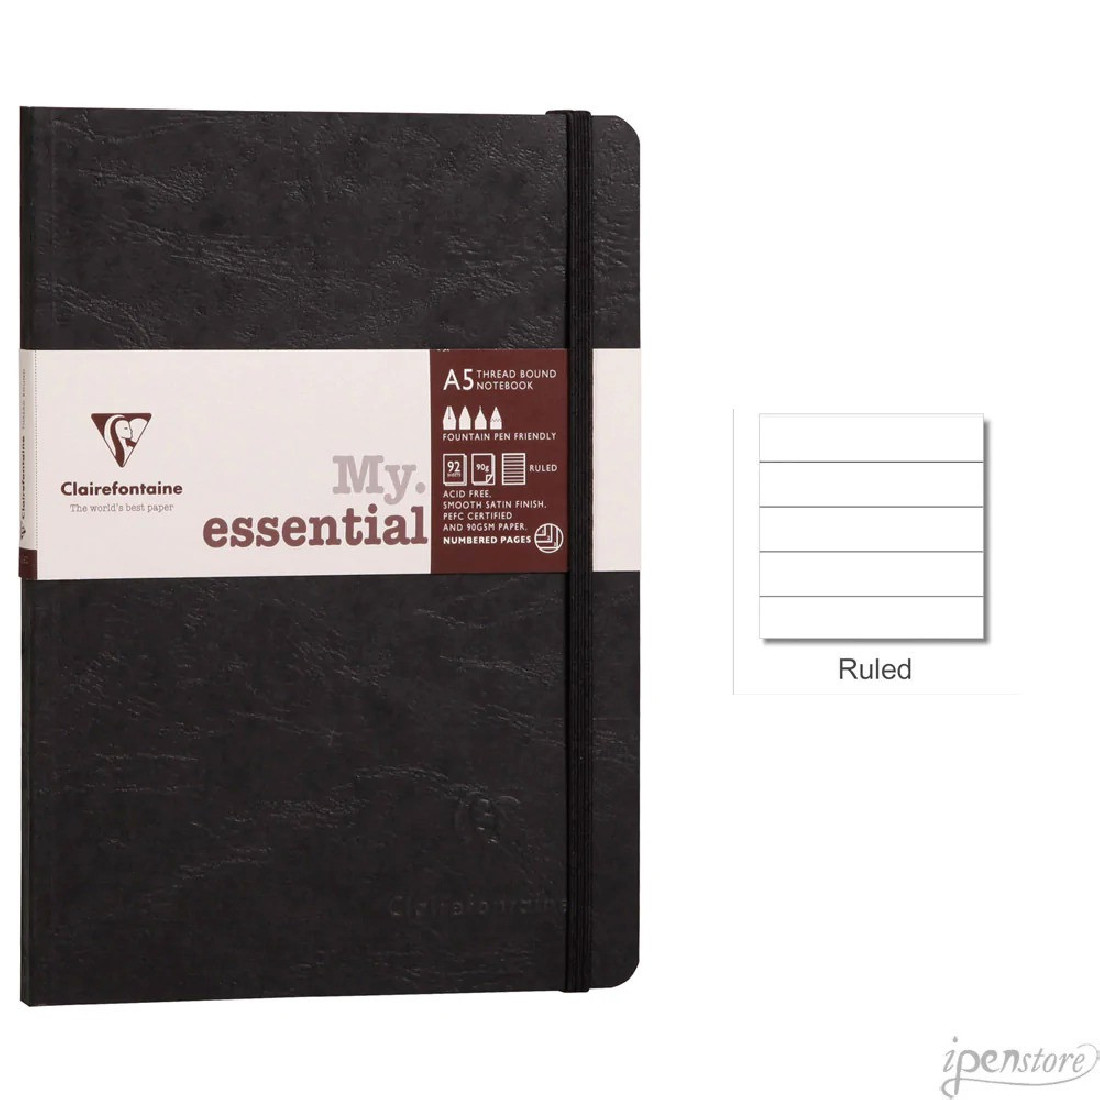 Clairefontaine A5 notebook My. essential, Lined, Black, soft cover, 192 pages, 90g